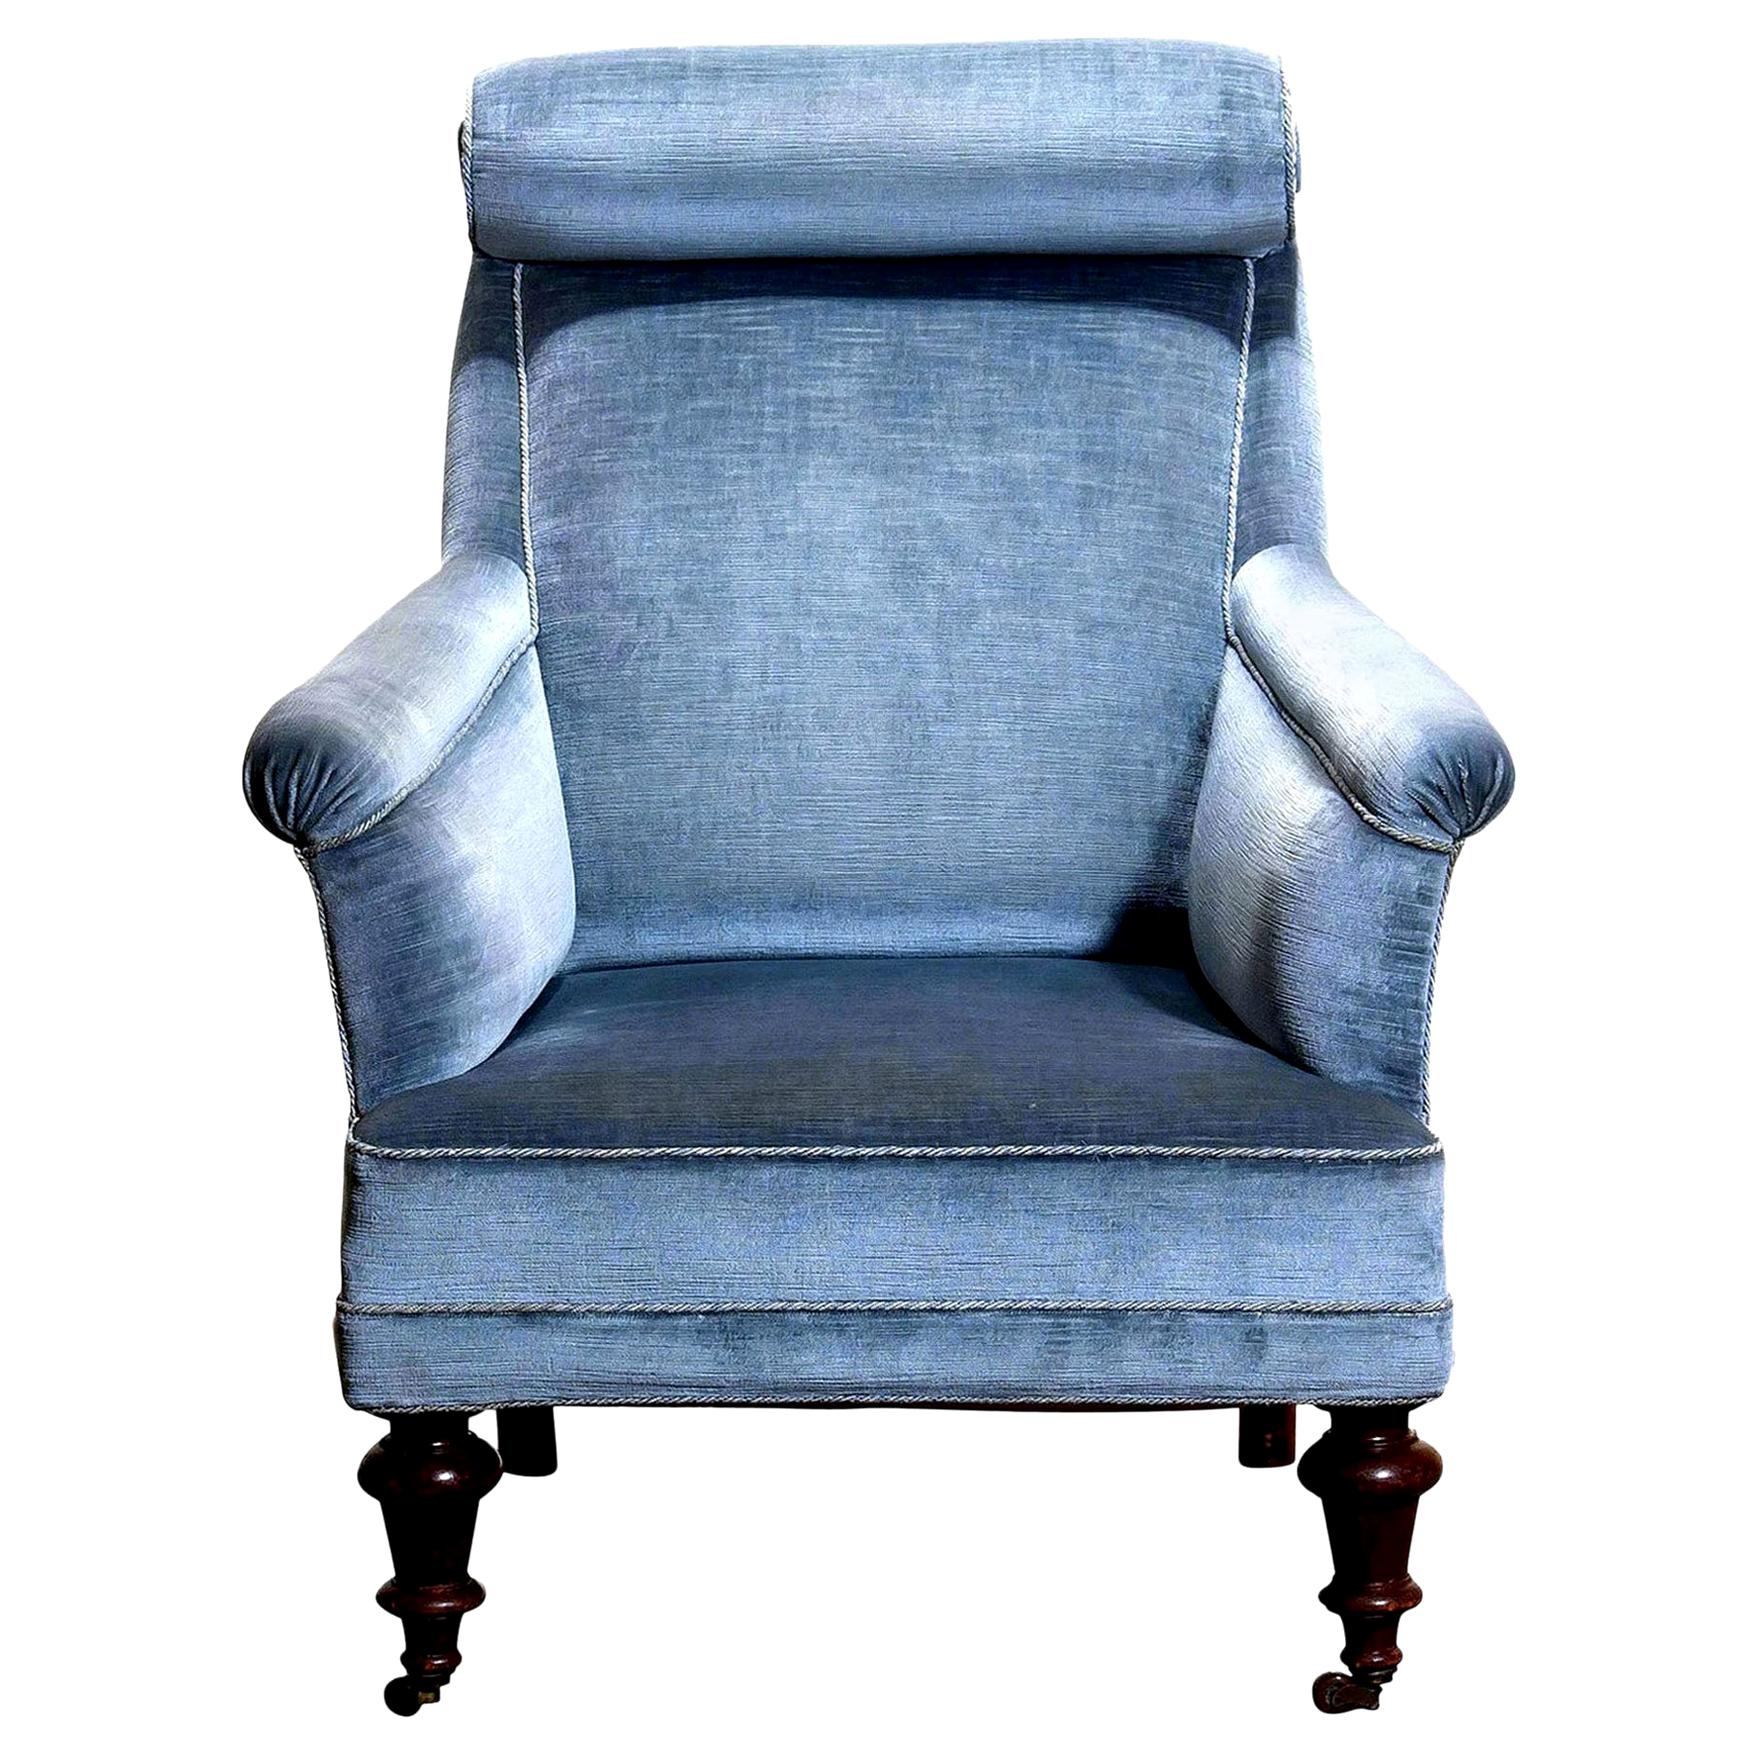 Rare and extremely comfortable and beautiful bergère or lounge chair in Dorothy Draper style from the turn to the 20th century.
Upholstered in ice blue velvet and in good condition.

Period: 1900.